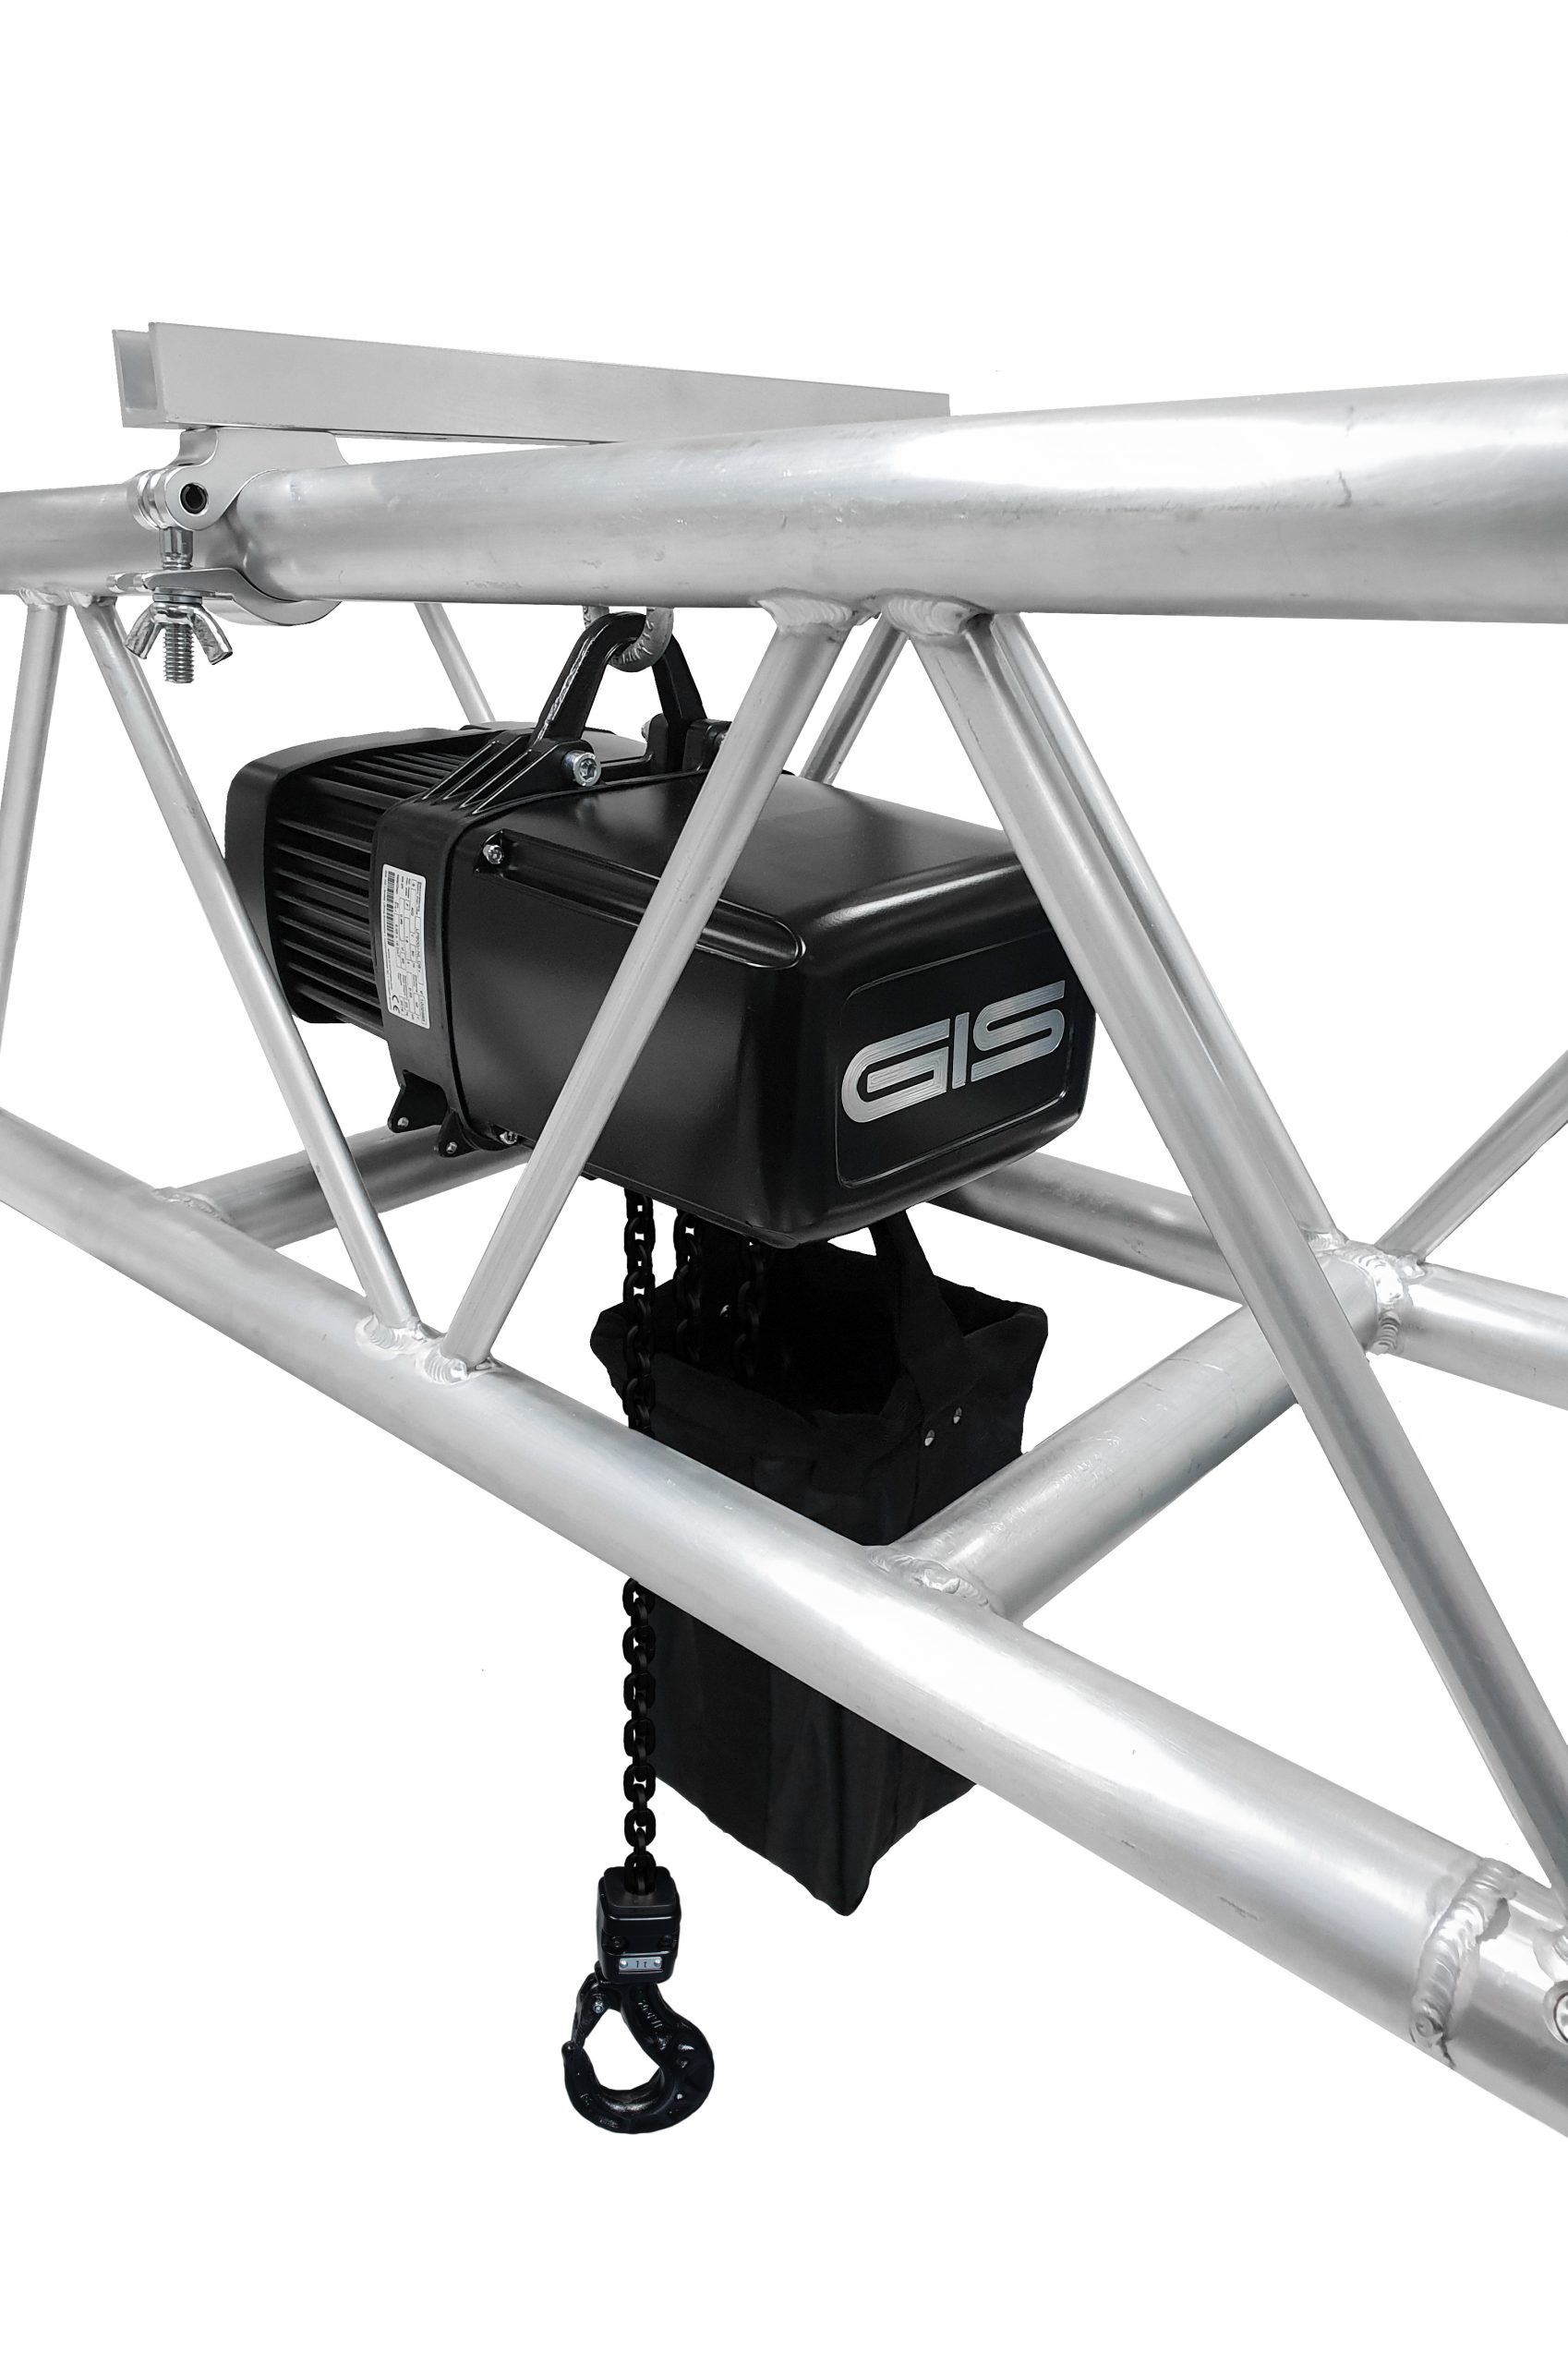 GIS Launches Two Lightweight Entertainment Hoists for Mobile Use